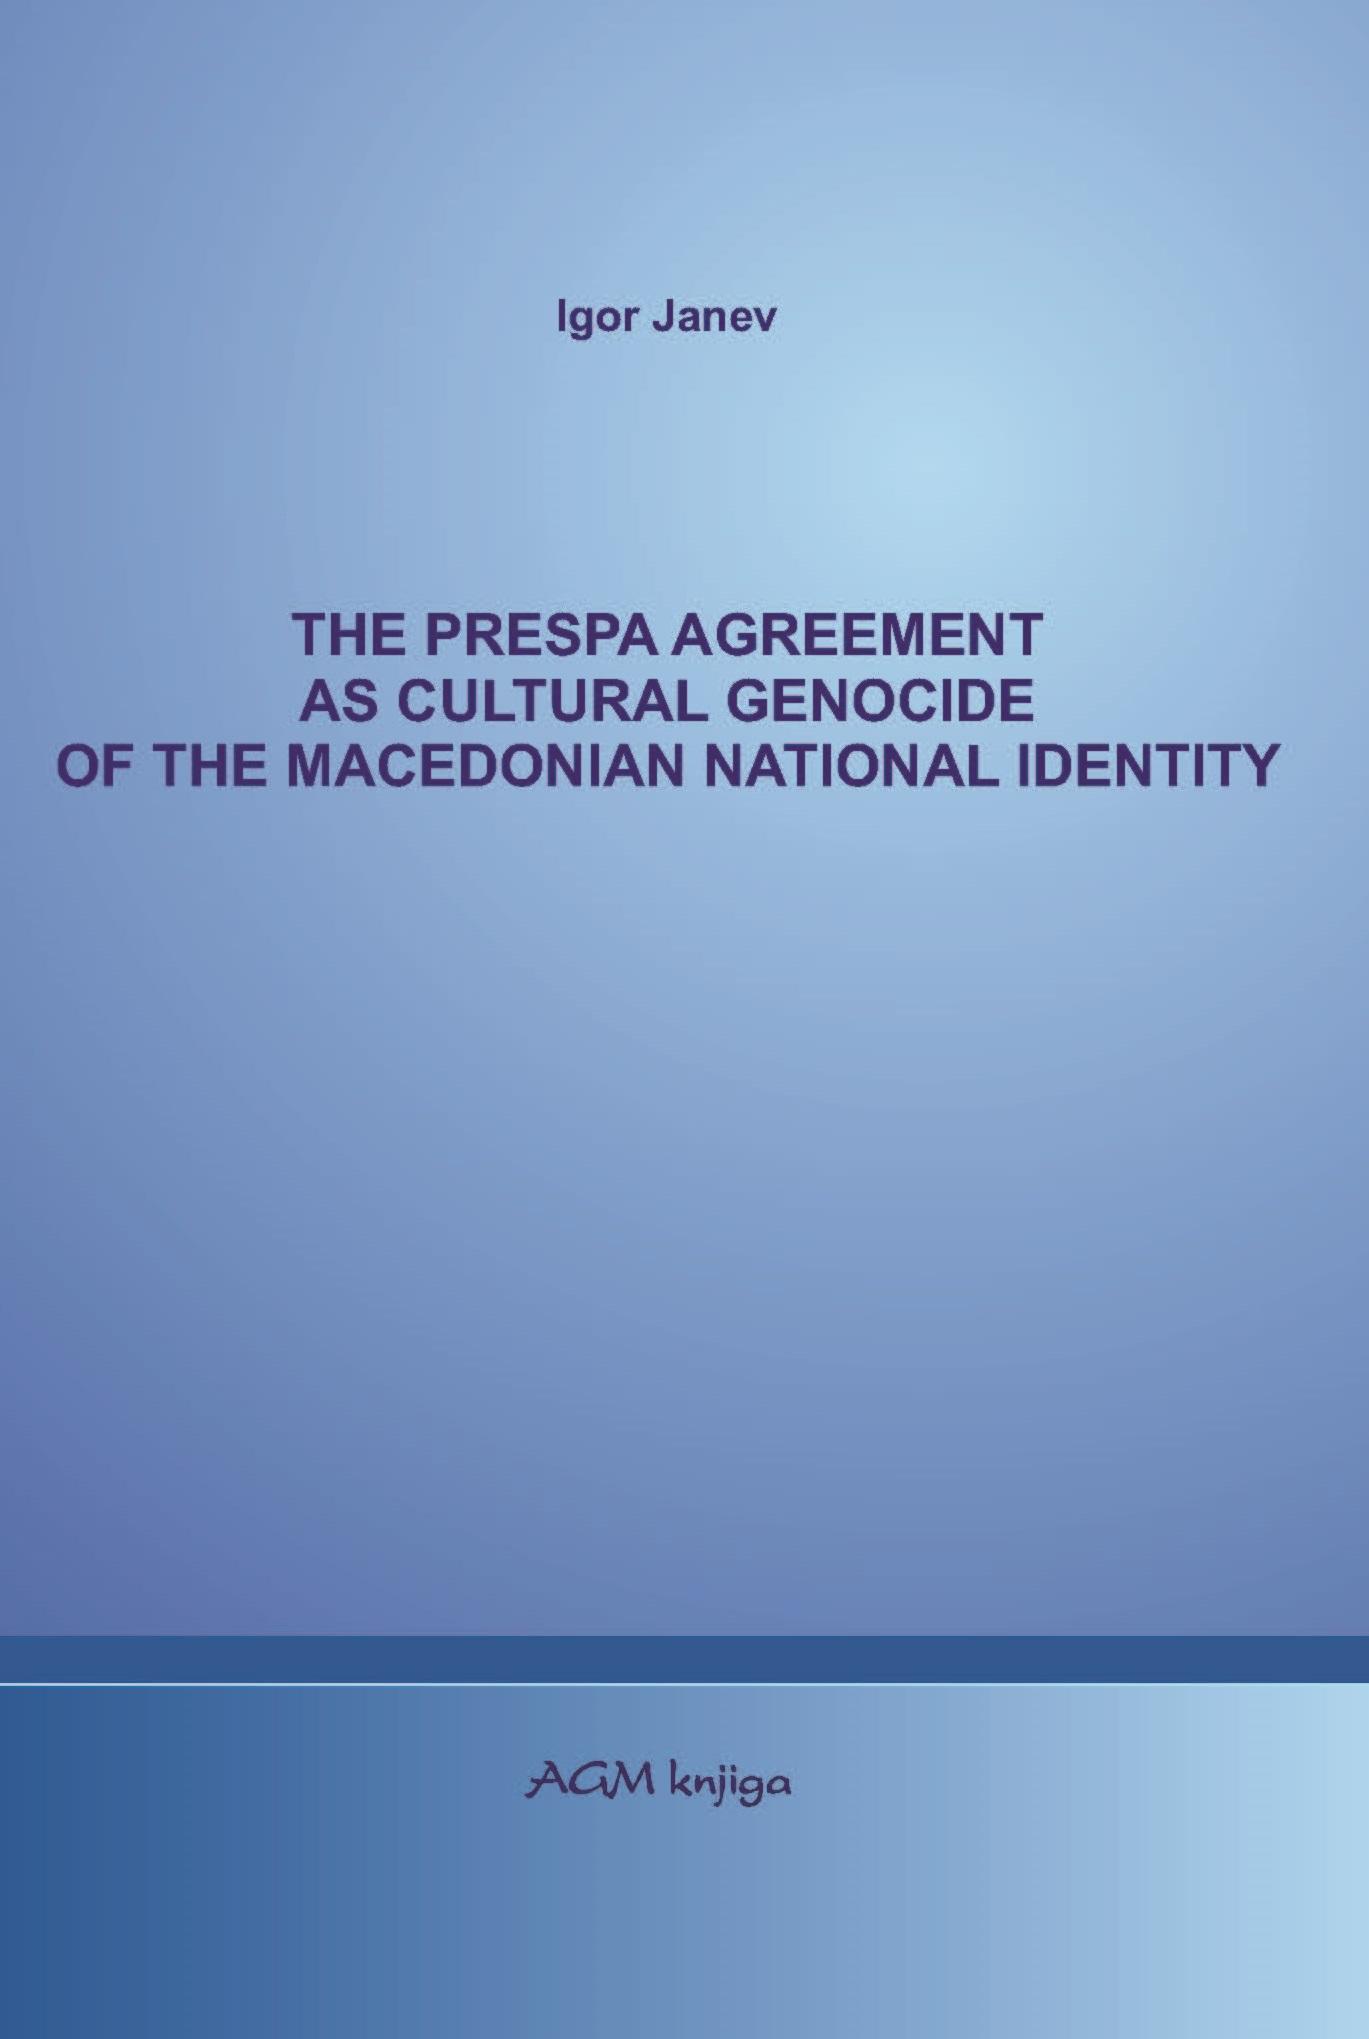 THE PRESPA AGREEMENT AS CULTURAL GENOCIDE OF THE MACEDONIAN NATIONAL IDENTITY 